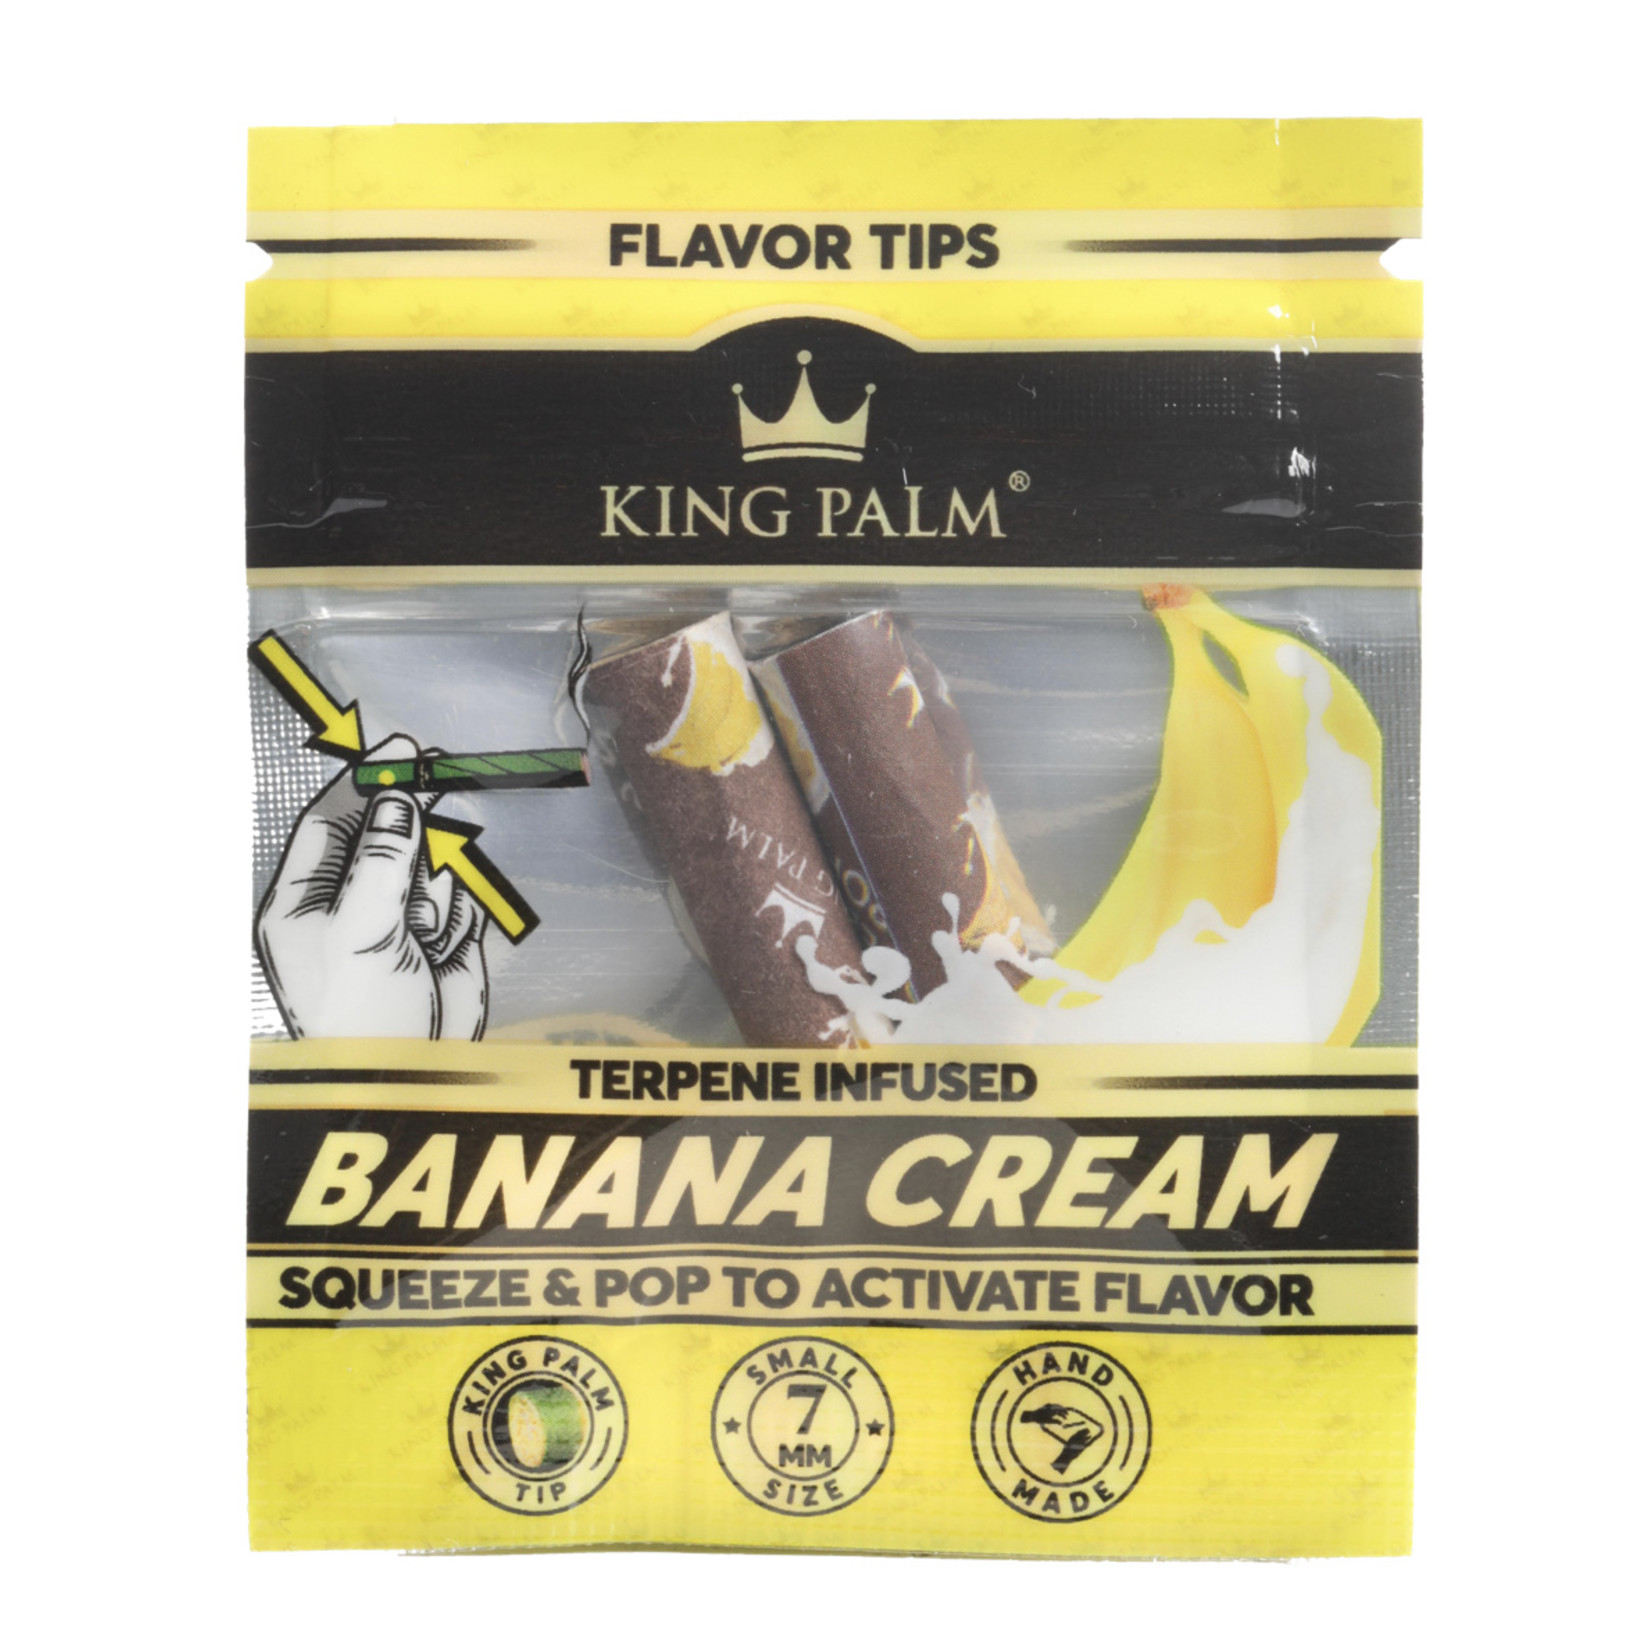 King Palm King palm flavor tips